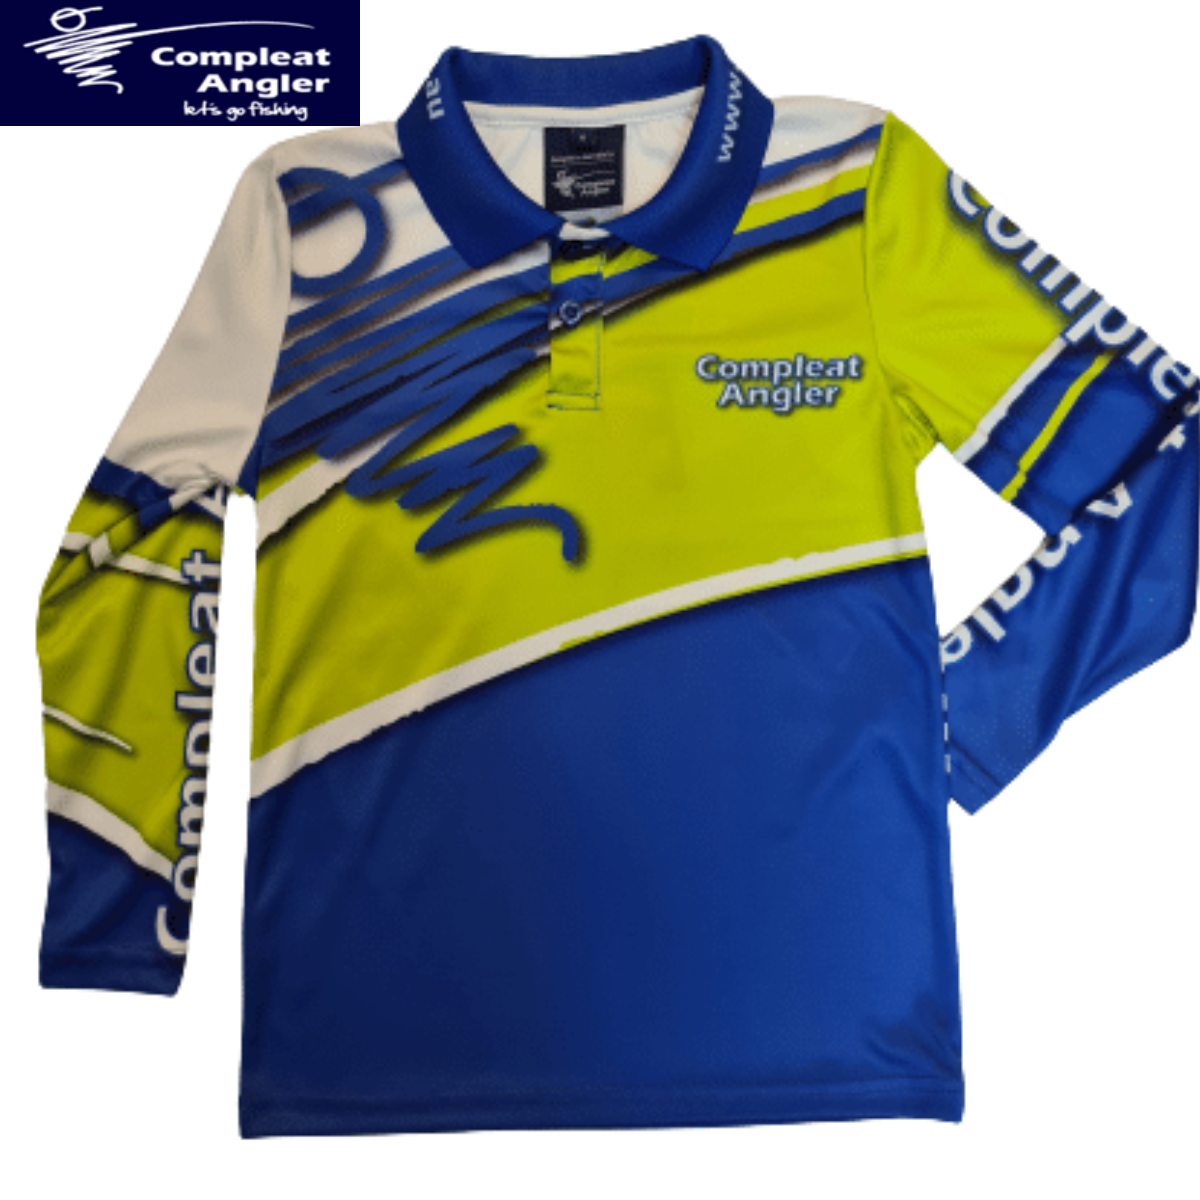 COMPLEAT ANGLER TOURNO SHIRT - KIDS 10  Compleat Angler & Camping World  Rockingham